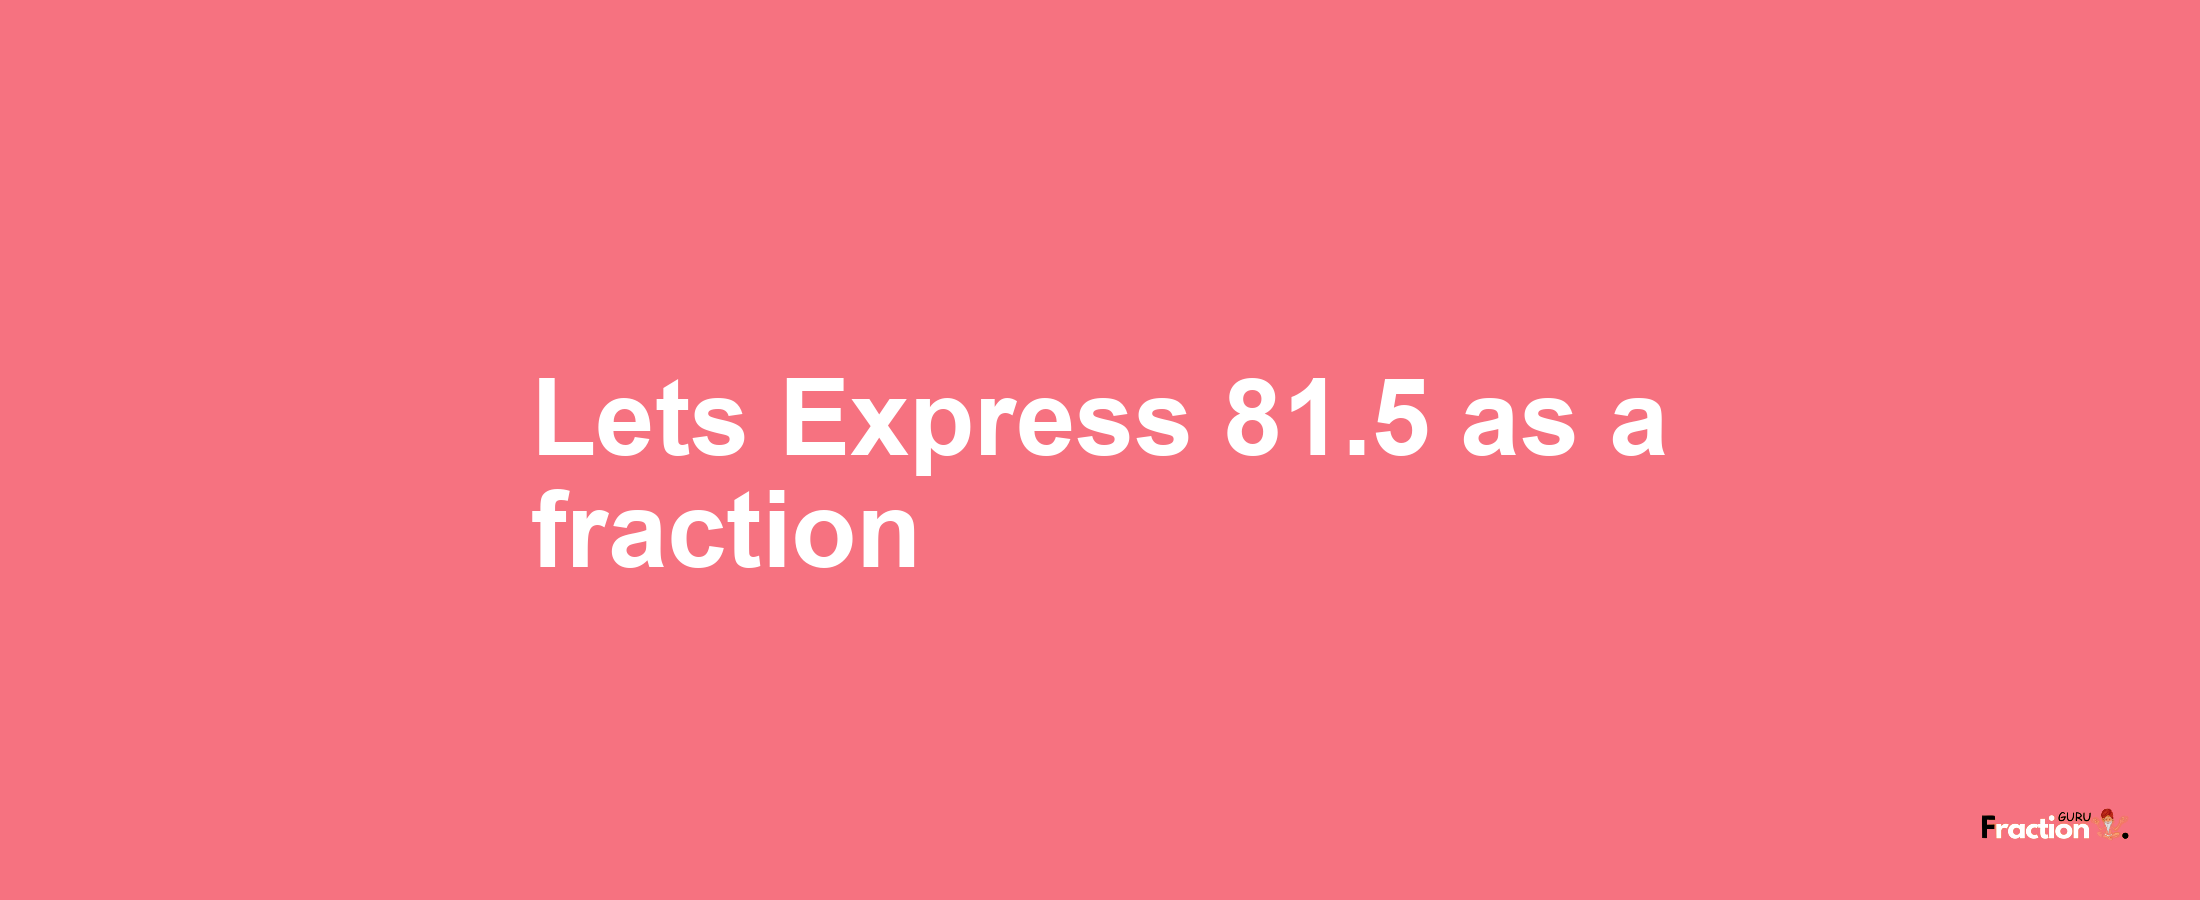 Lets Express 81.5 as afraction